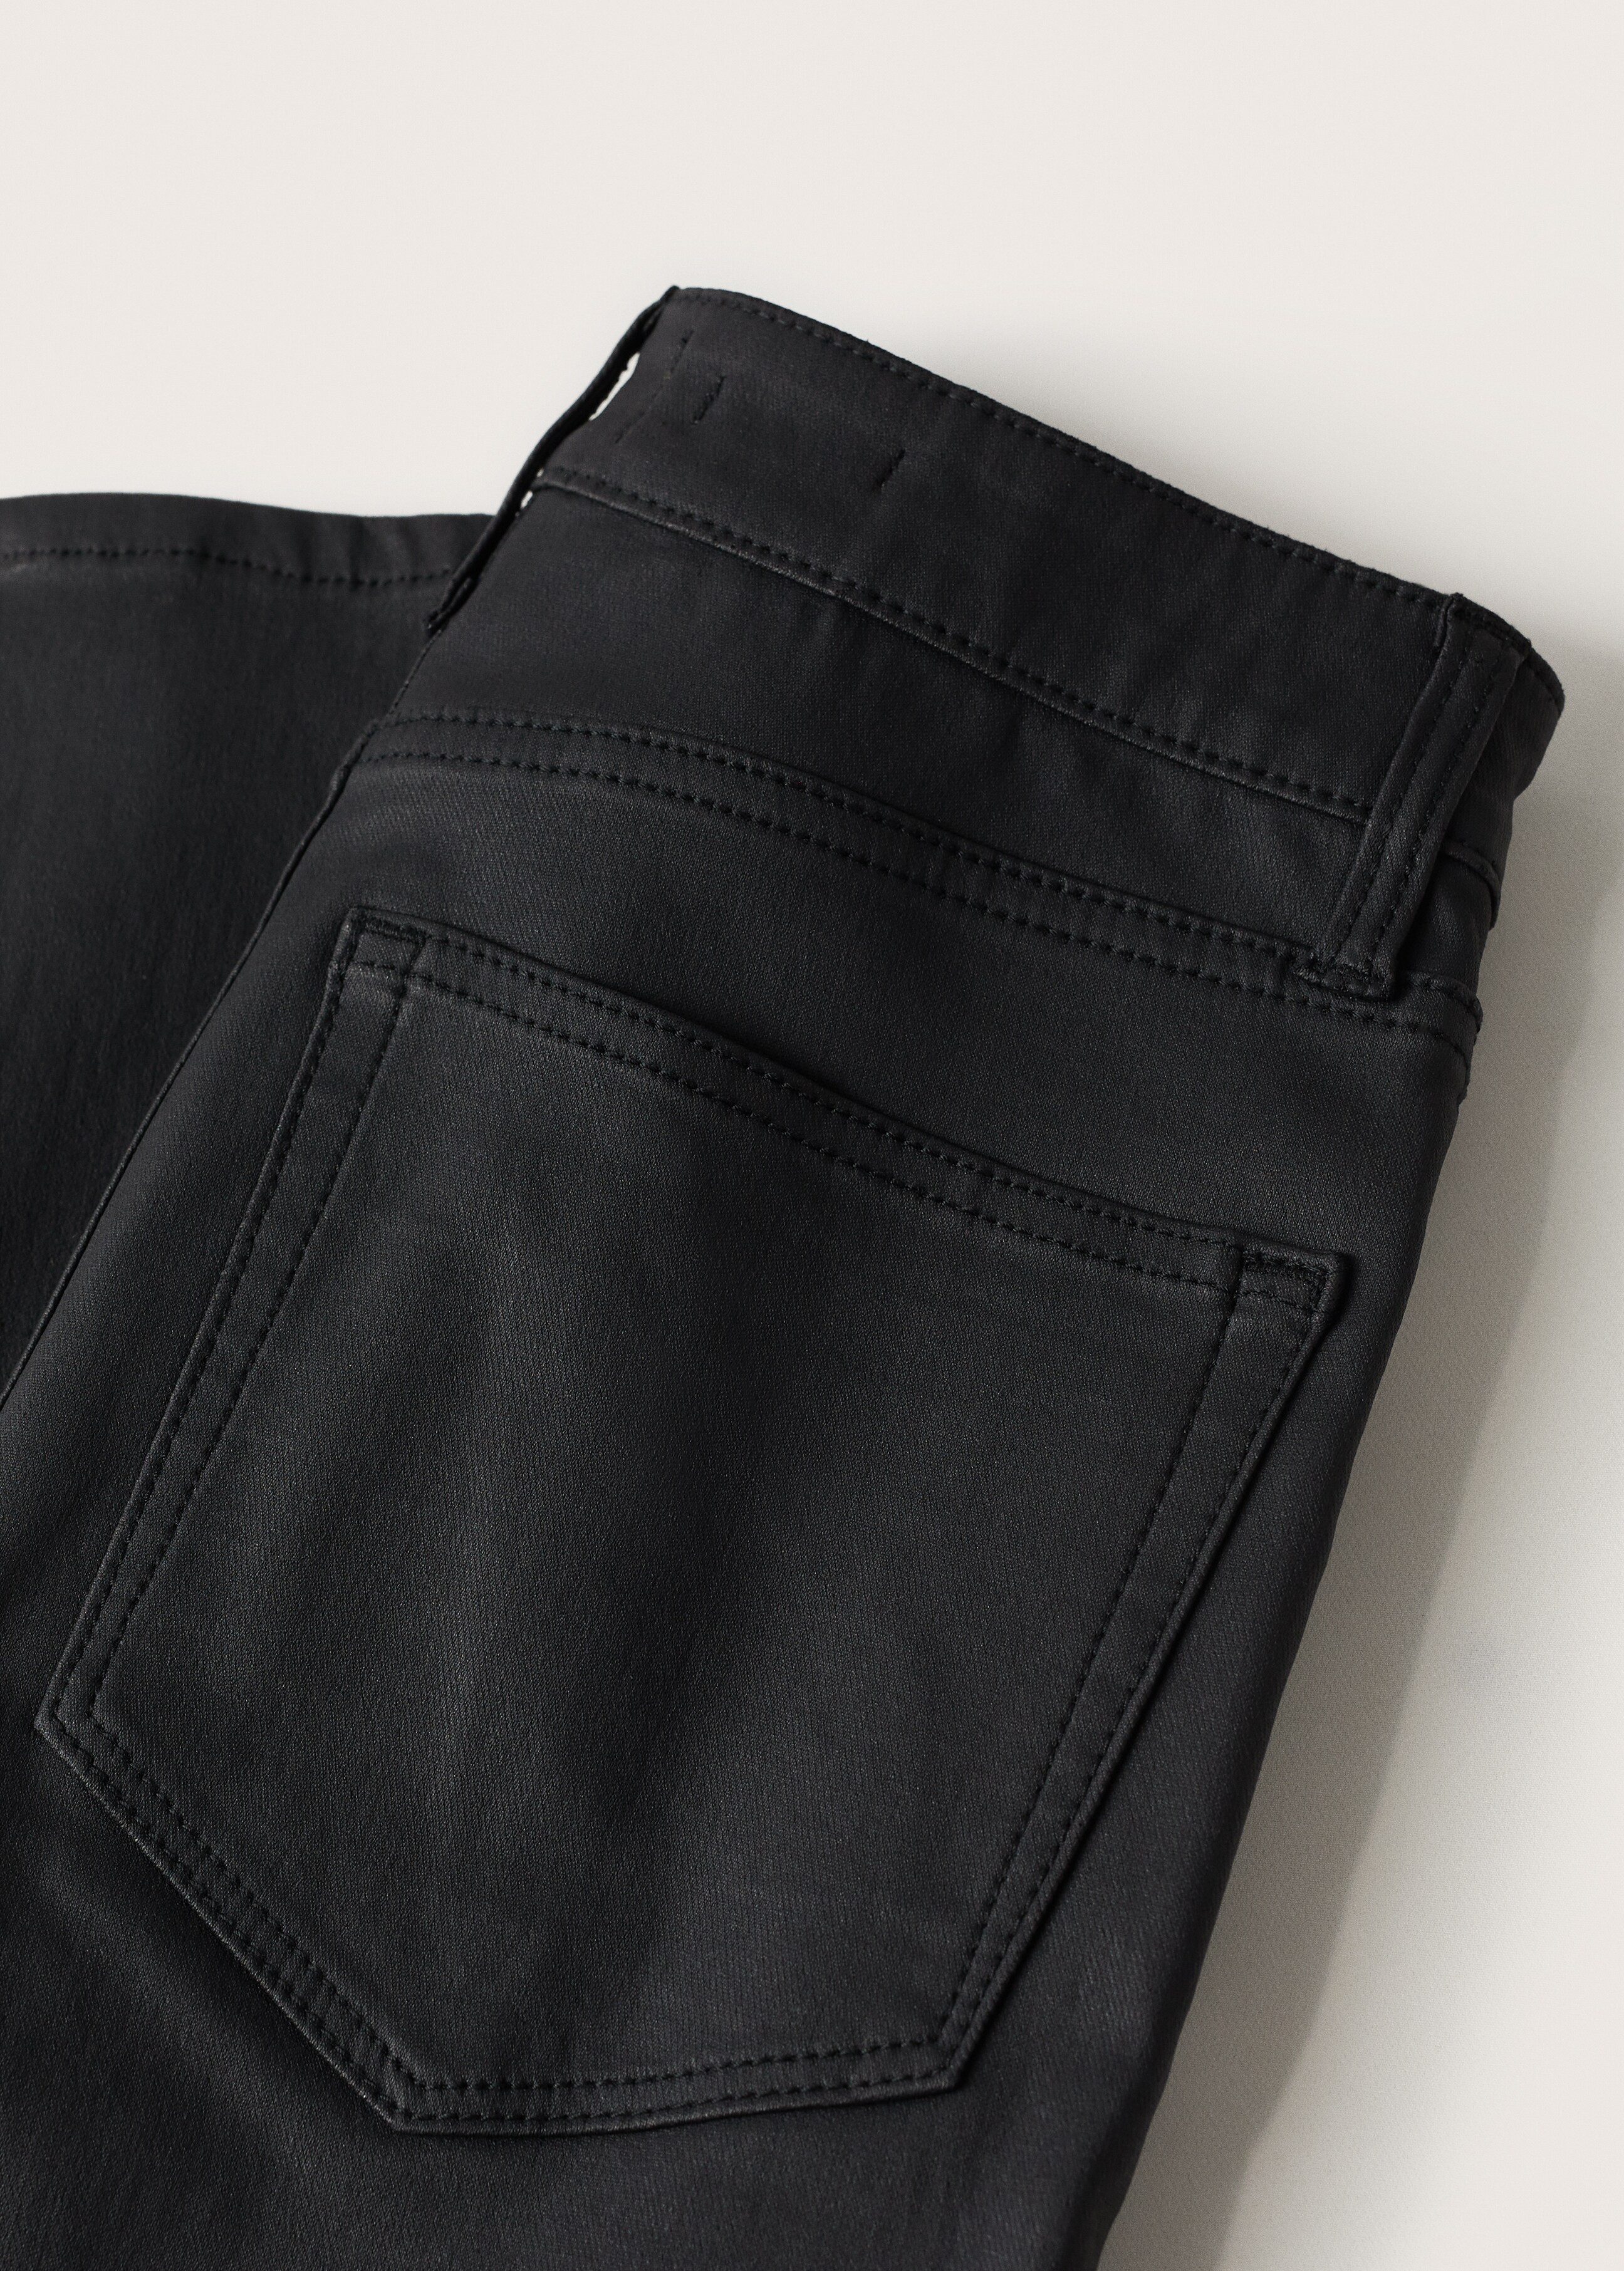 Skinny coated jeans - Details of the article 8